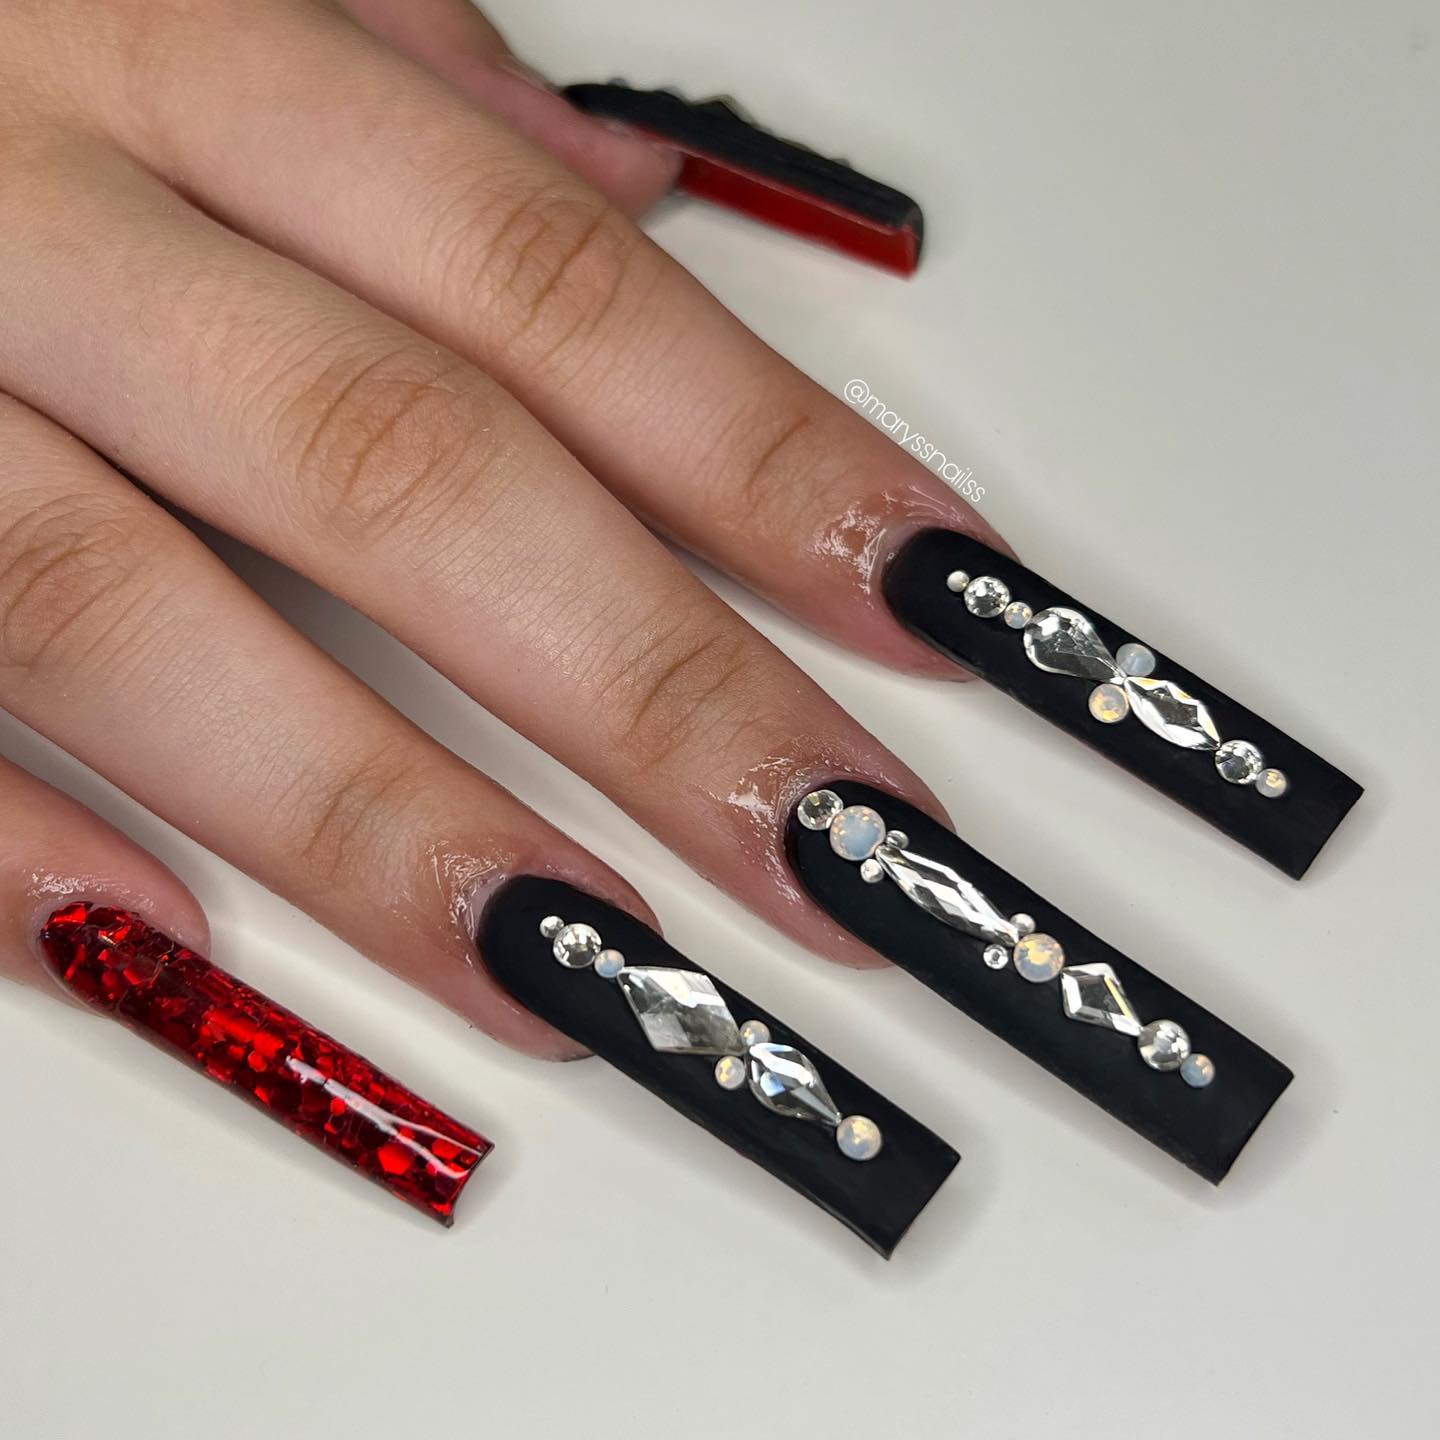 Long acrylic nails are super cool and you have to be bold to get it, right? To add these nails an extra beauty and boldness, let's apply a black matte nail polish with stones on them and a shiny red nail polish.